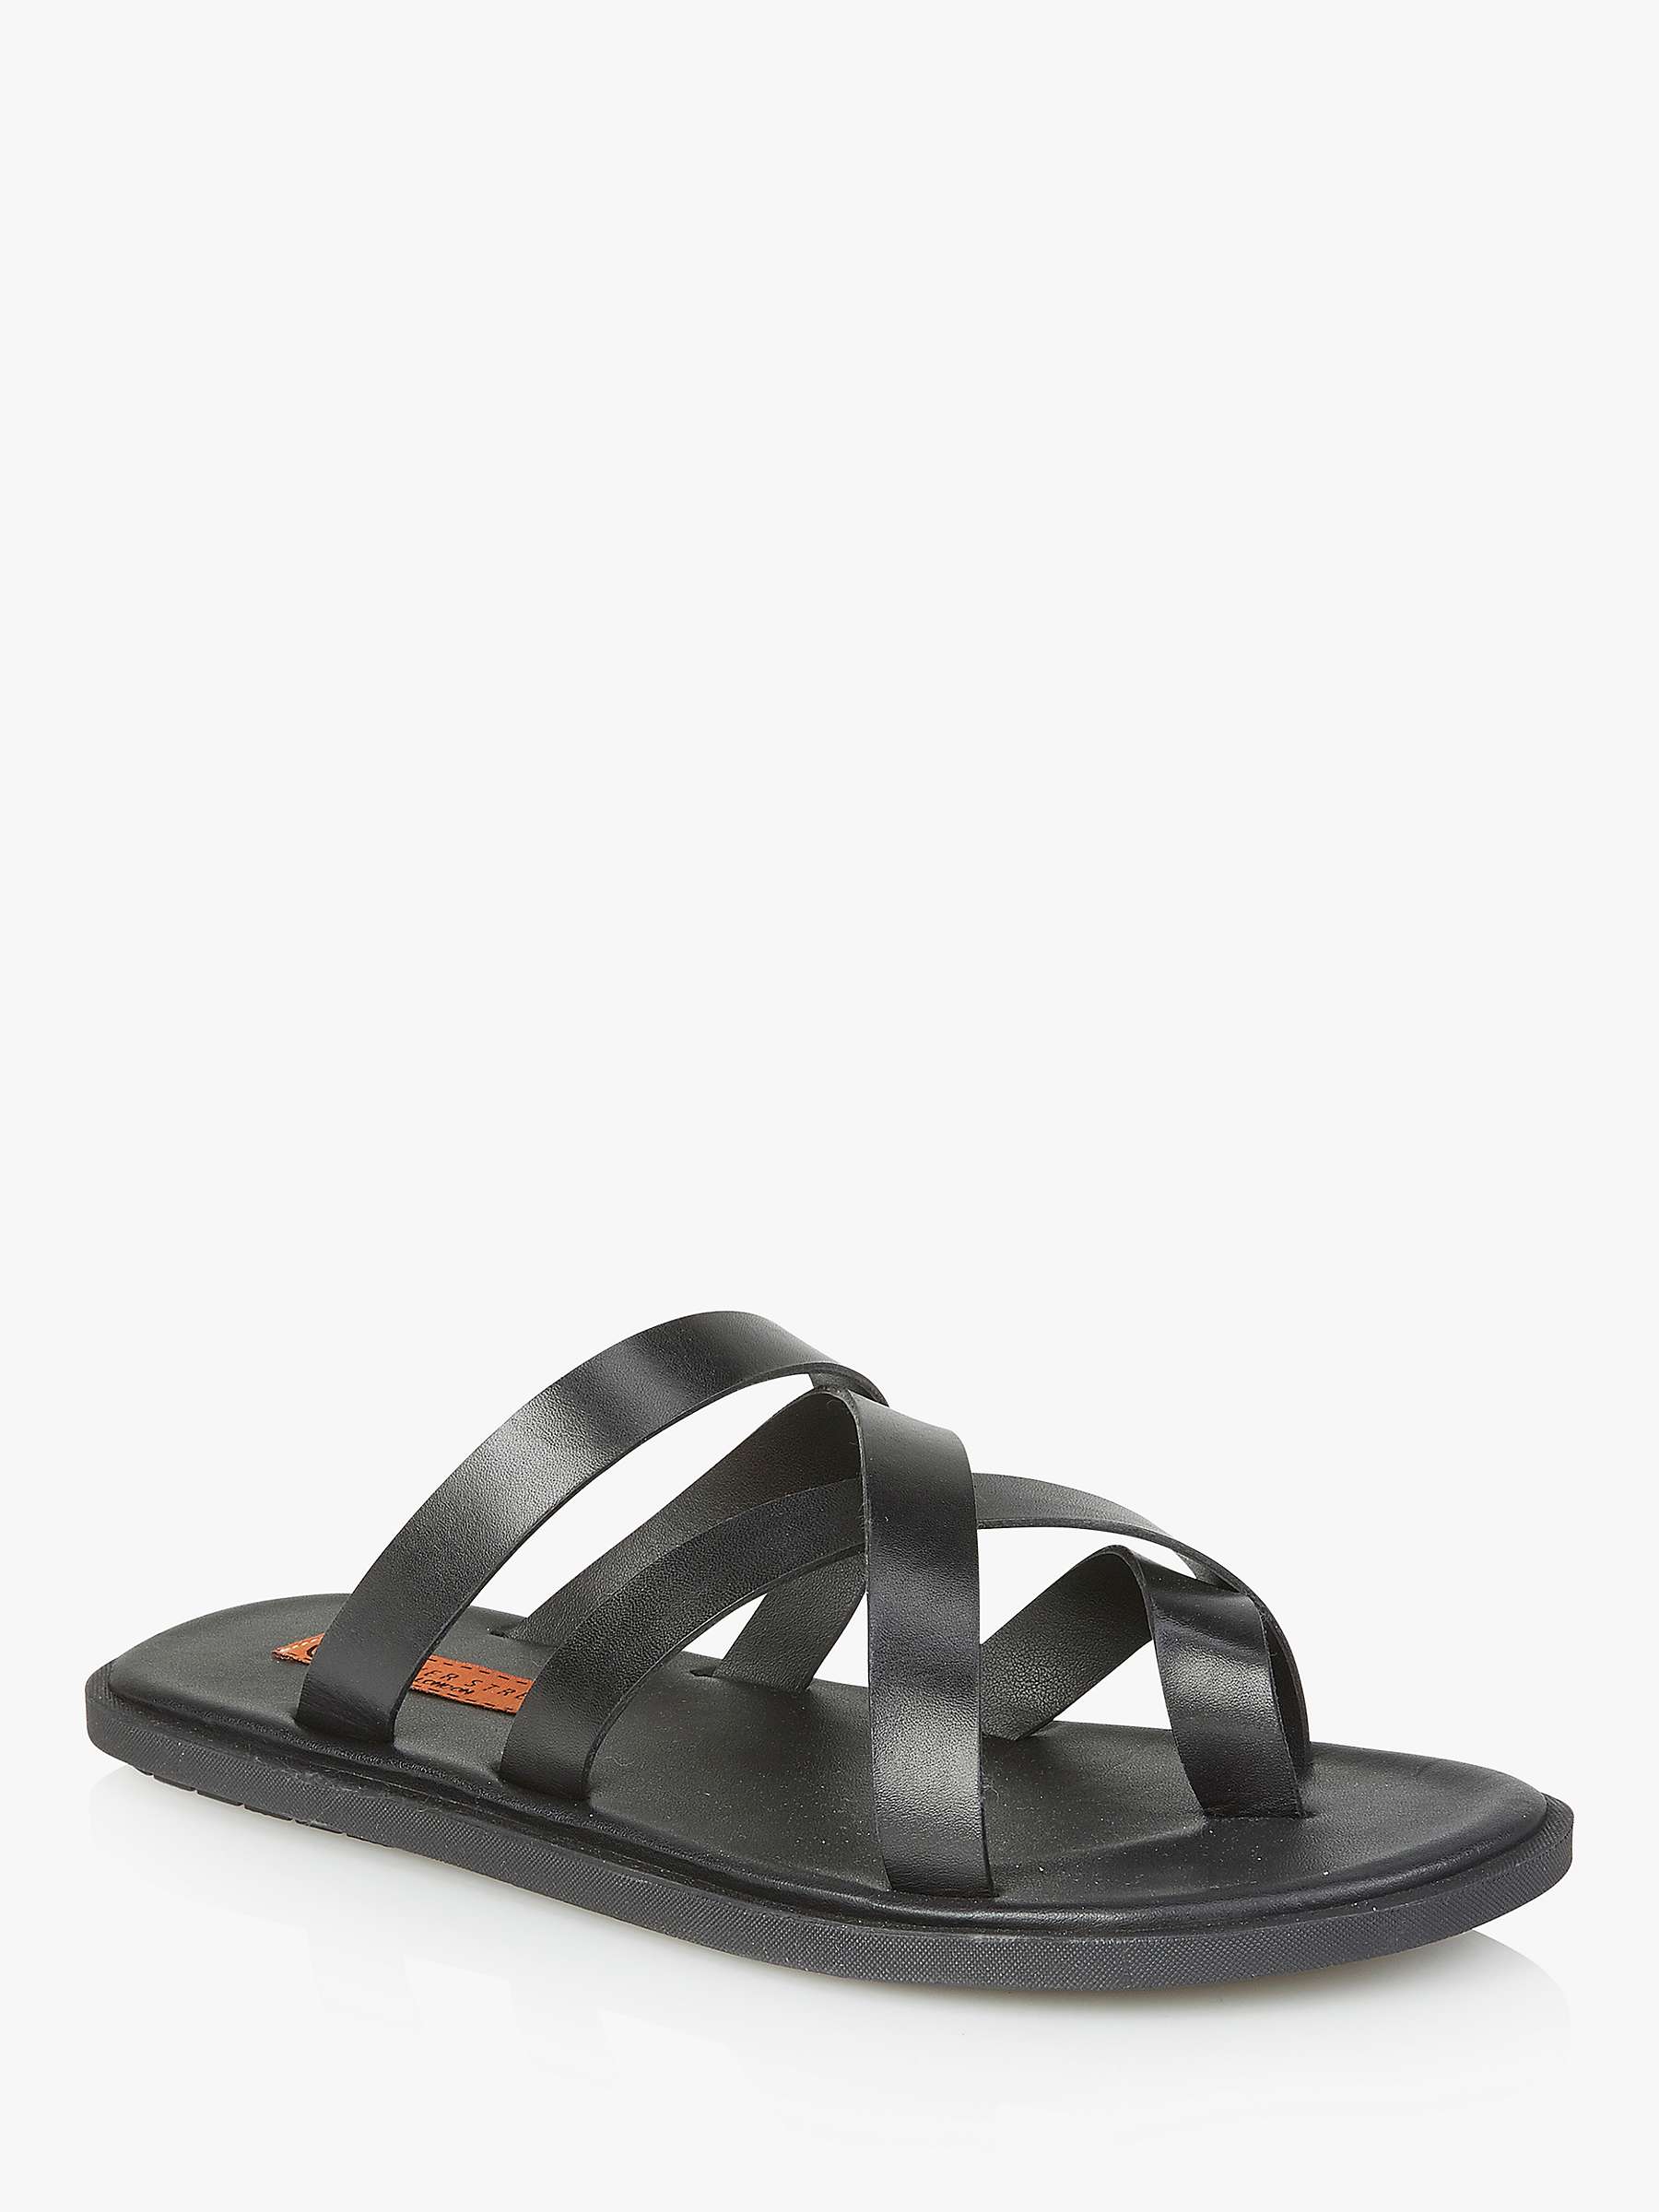 Buy Silver Street London Crouchend Leather Sandals, Black Online at johnlewis.com